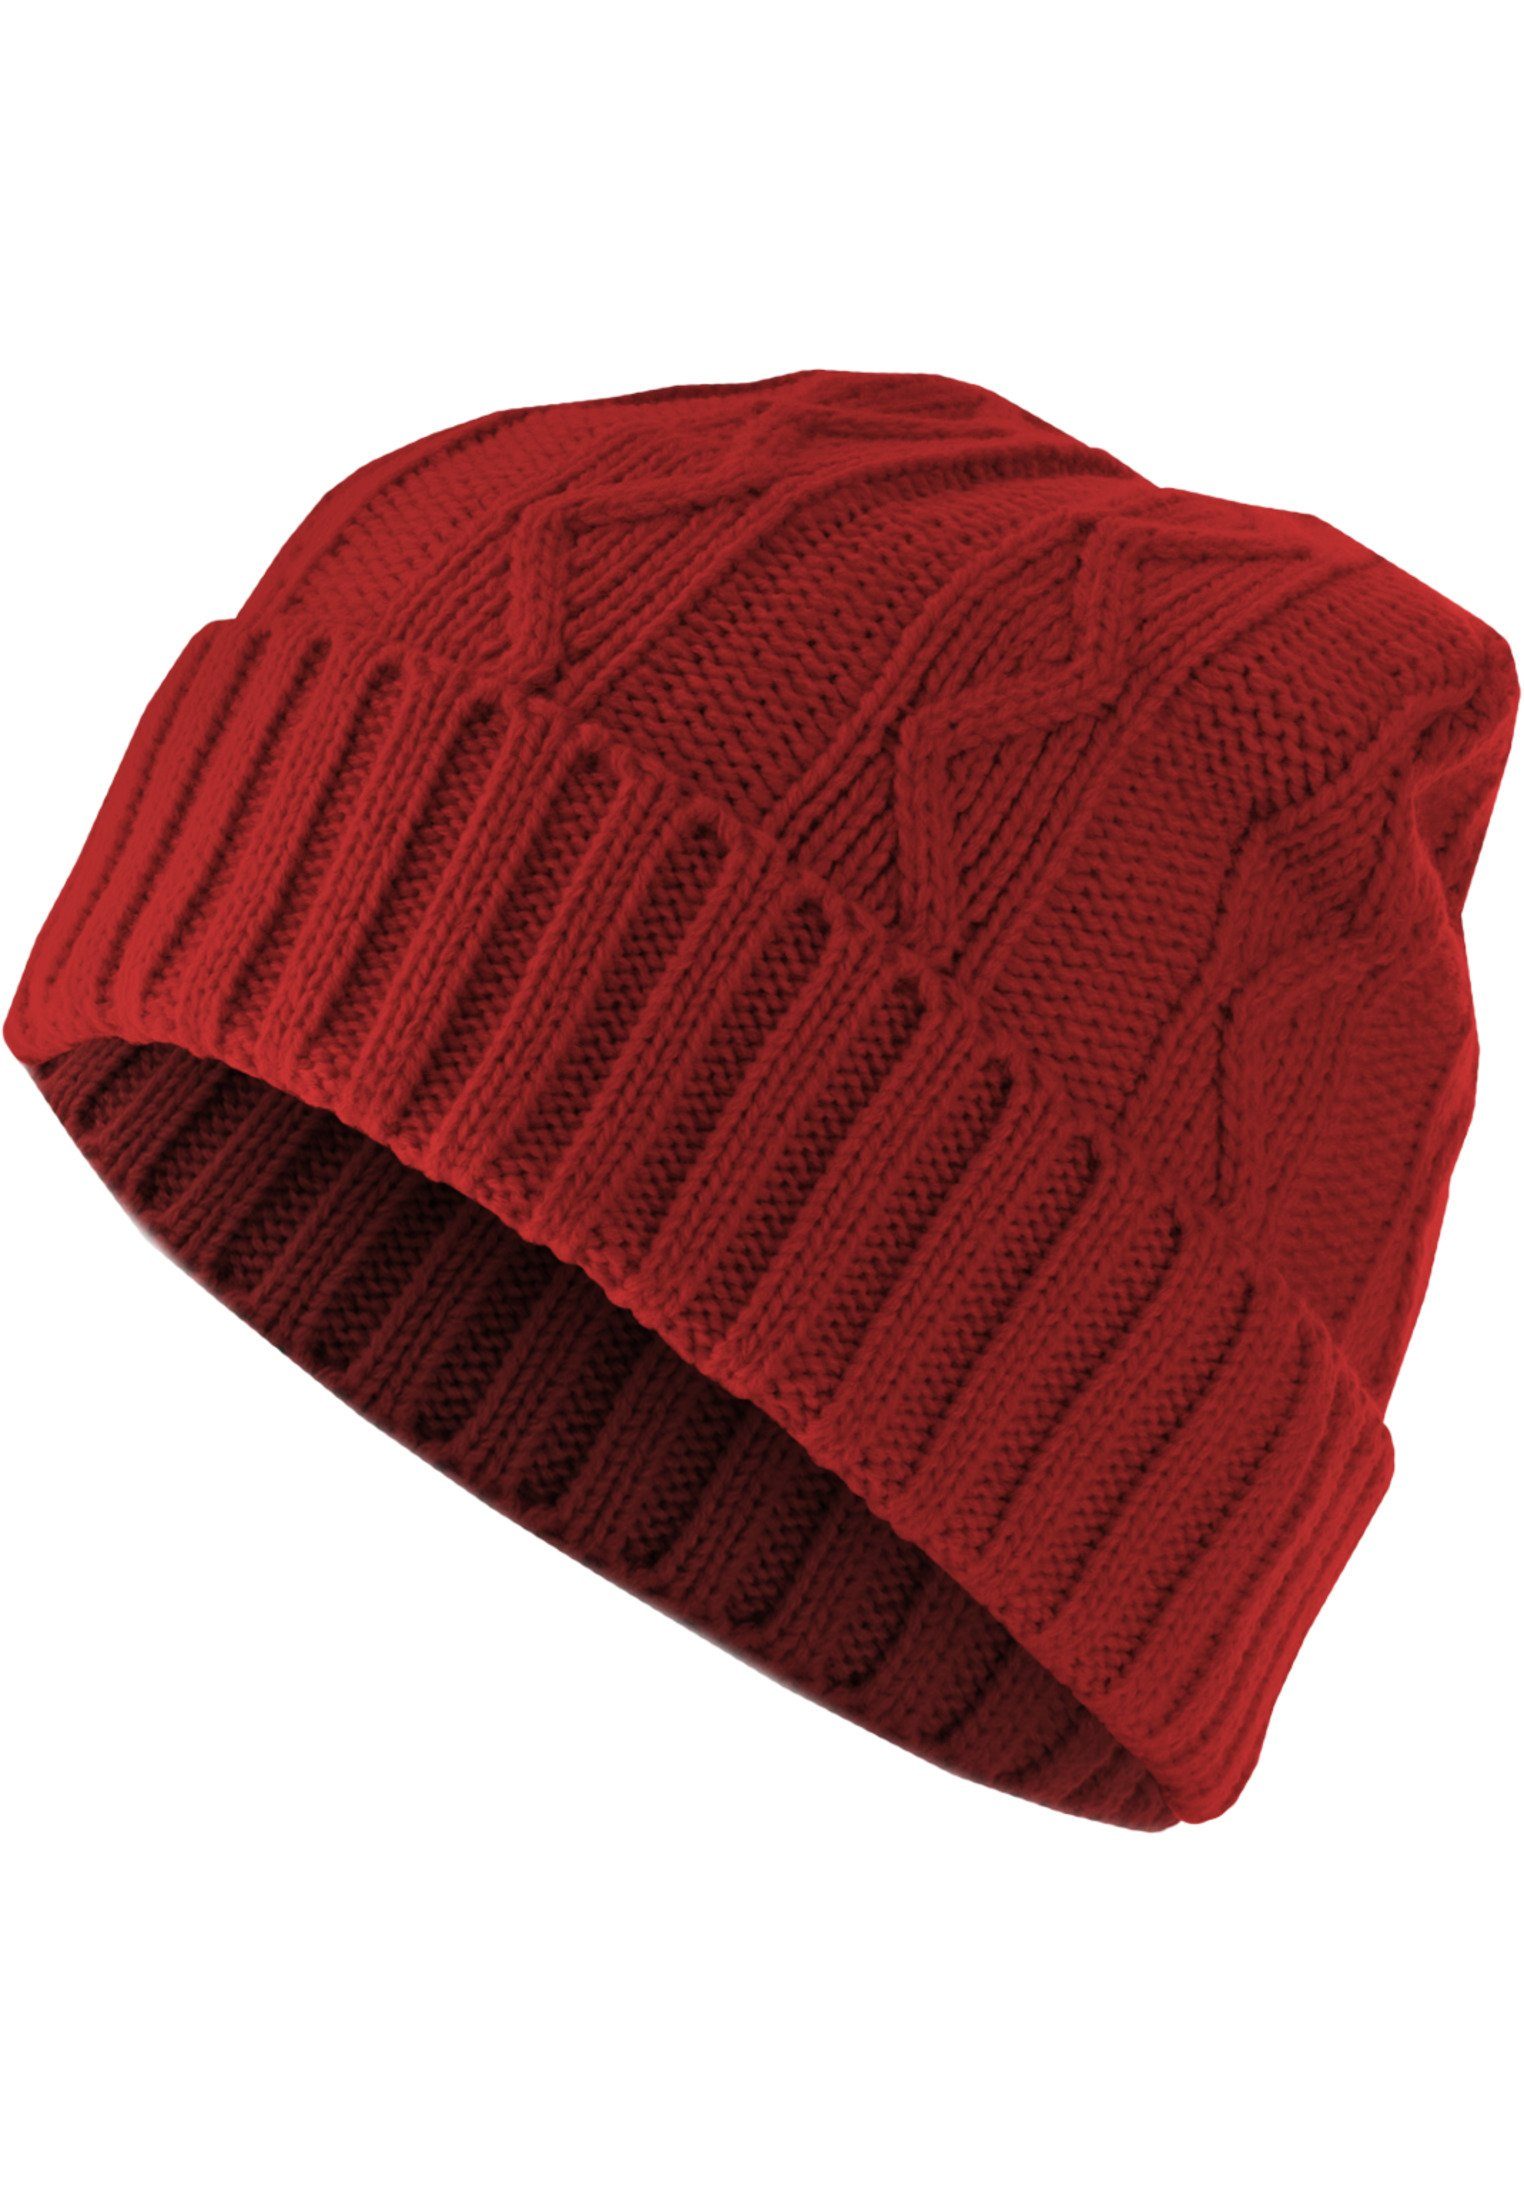 MSTRDS Beanie Accessoires Beanie Cable Flap (1-St) red | Beanies